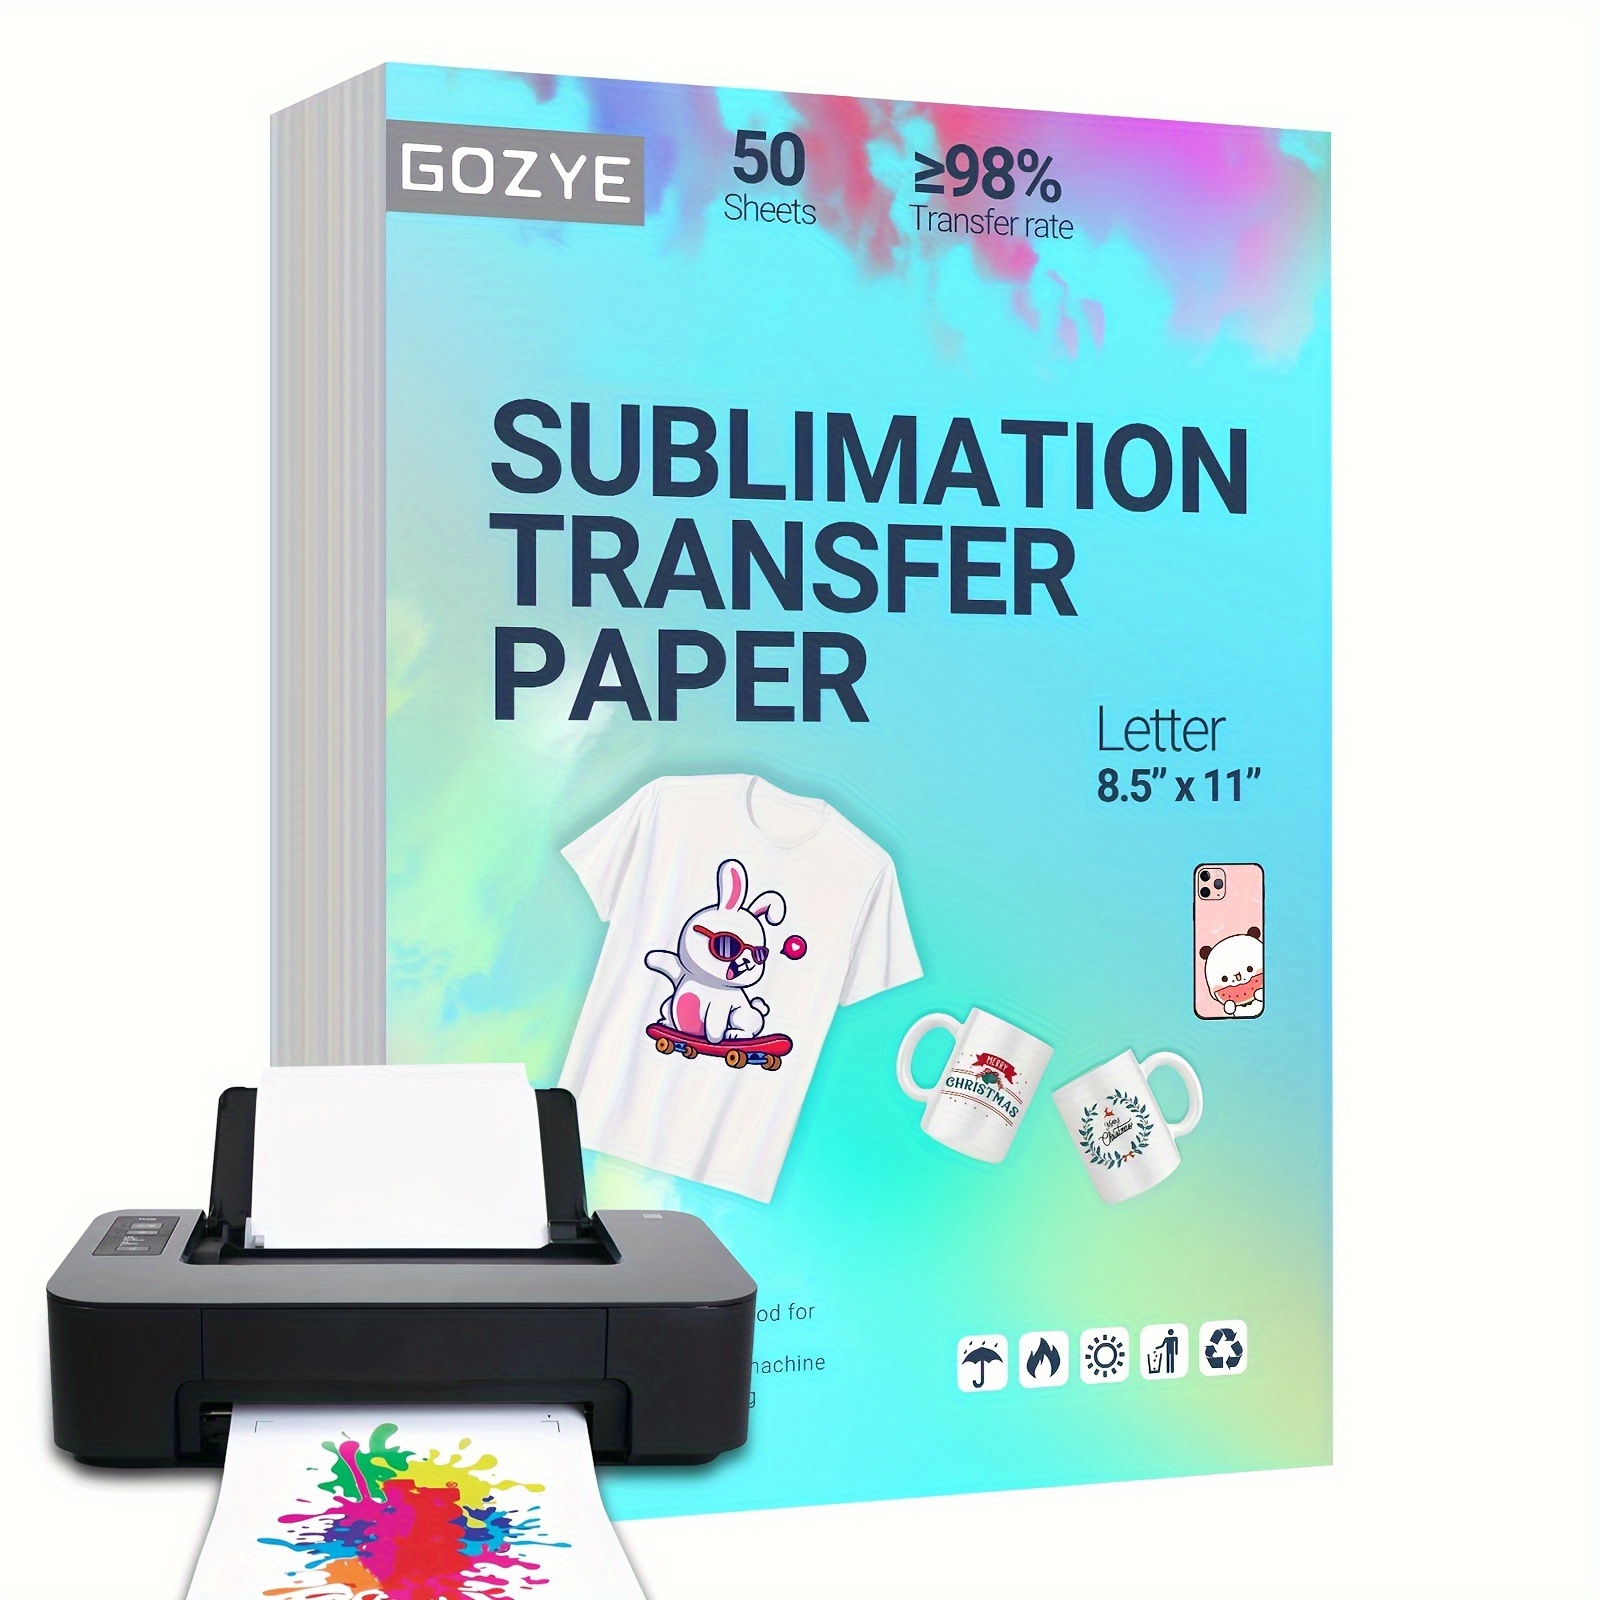 A-SUB Inkjet Printable Iron On Heat Transfer Paper for Dark Fabrics 20  Sheets 8.5x11 Inch DIY Cotton T-shirts Totes Bags 